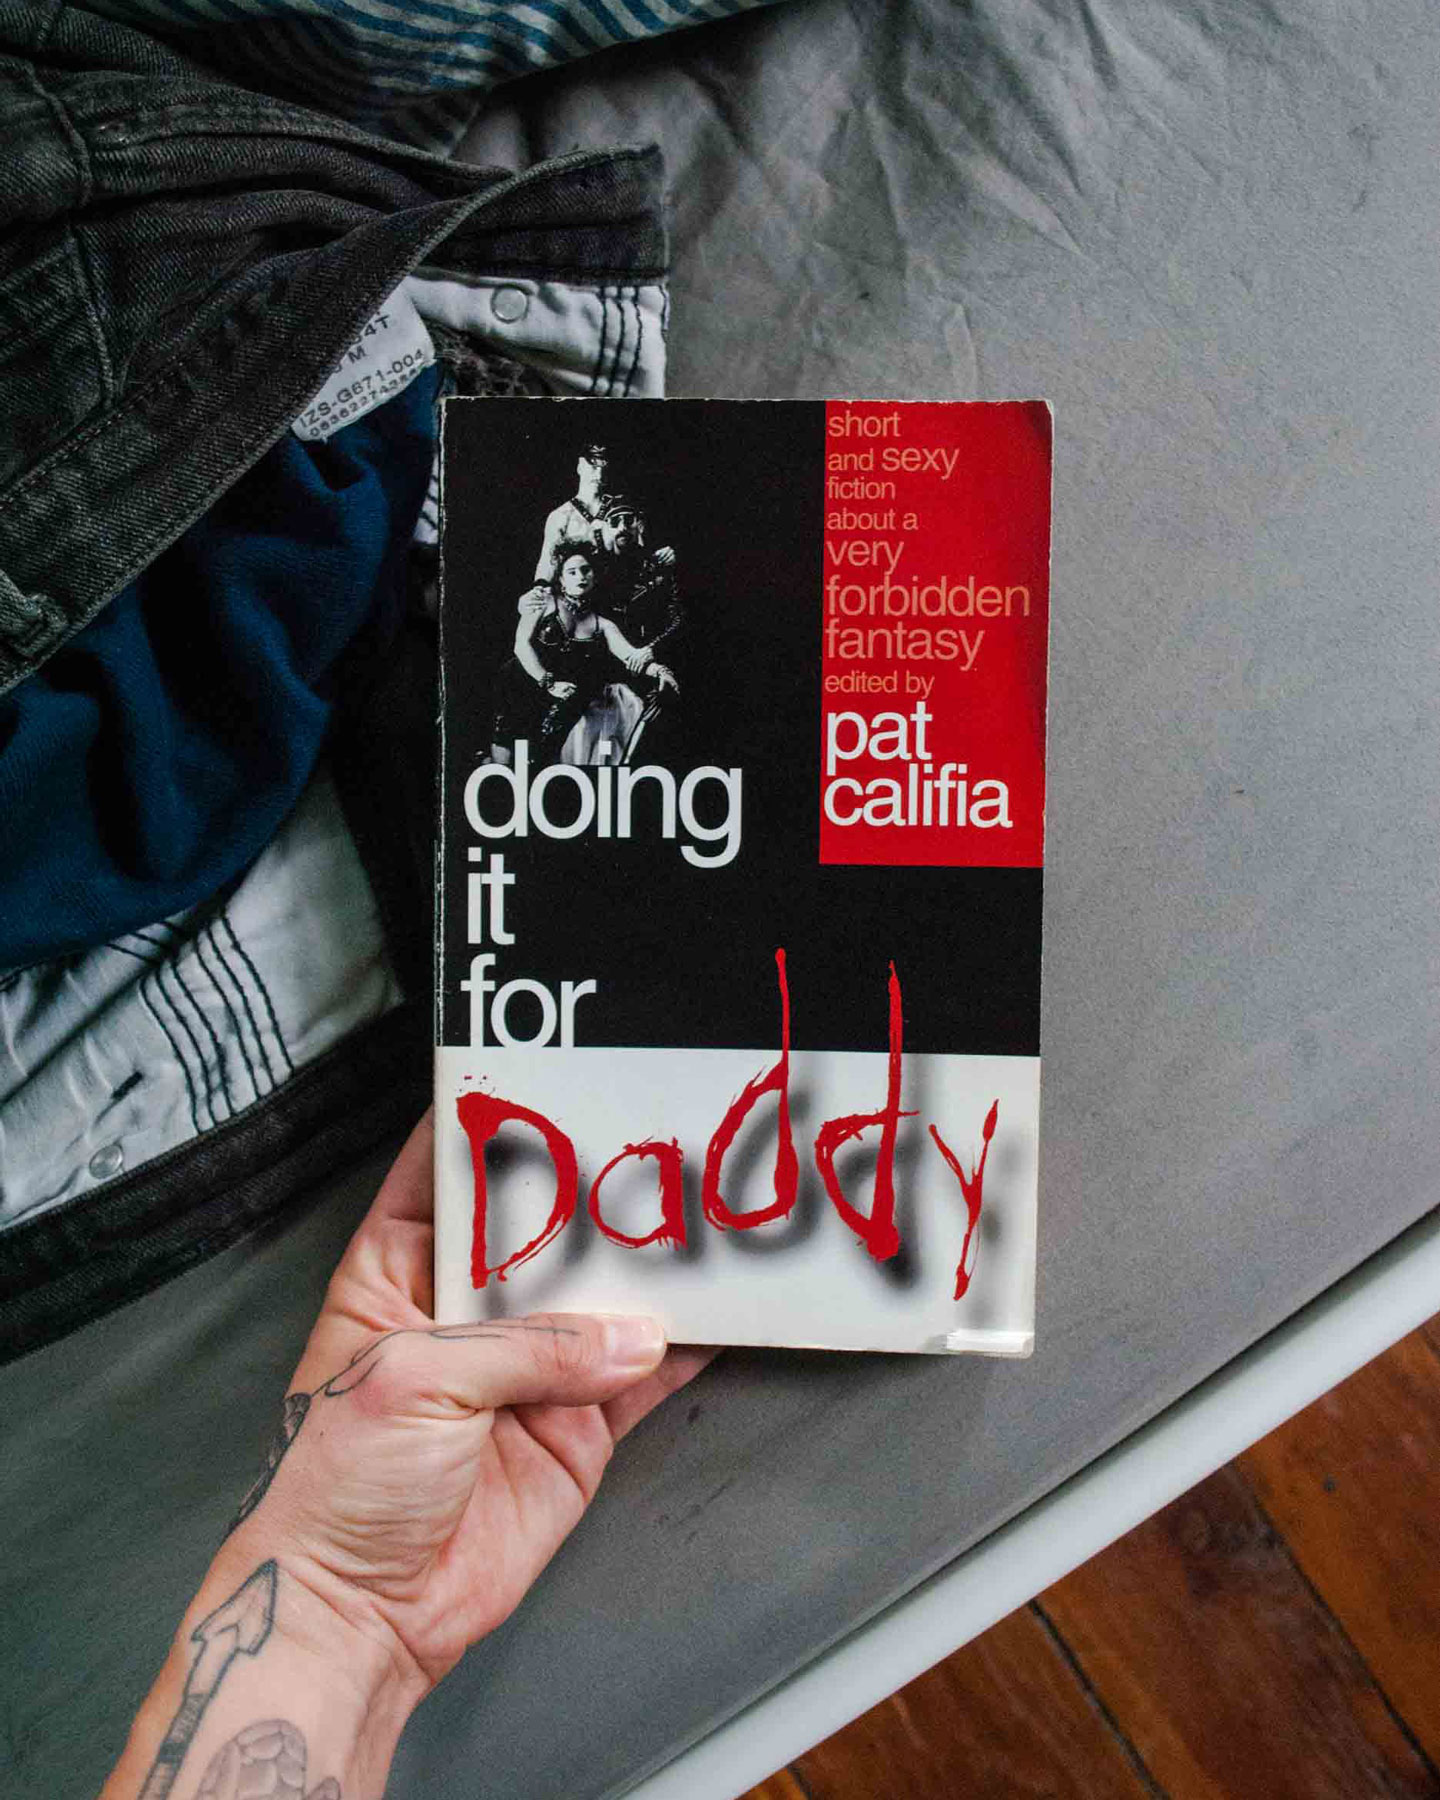 Monk Reviews Doing It For Daddy edited by Patrick Califia